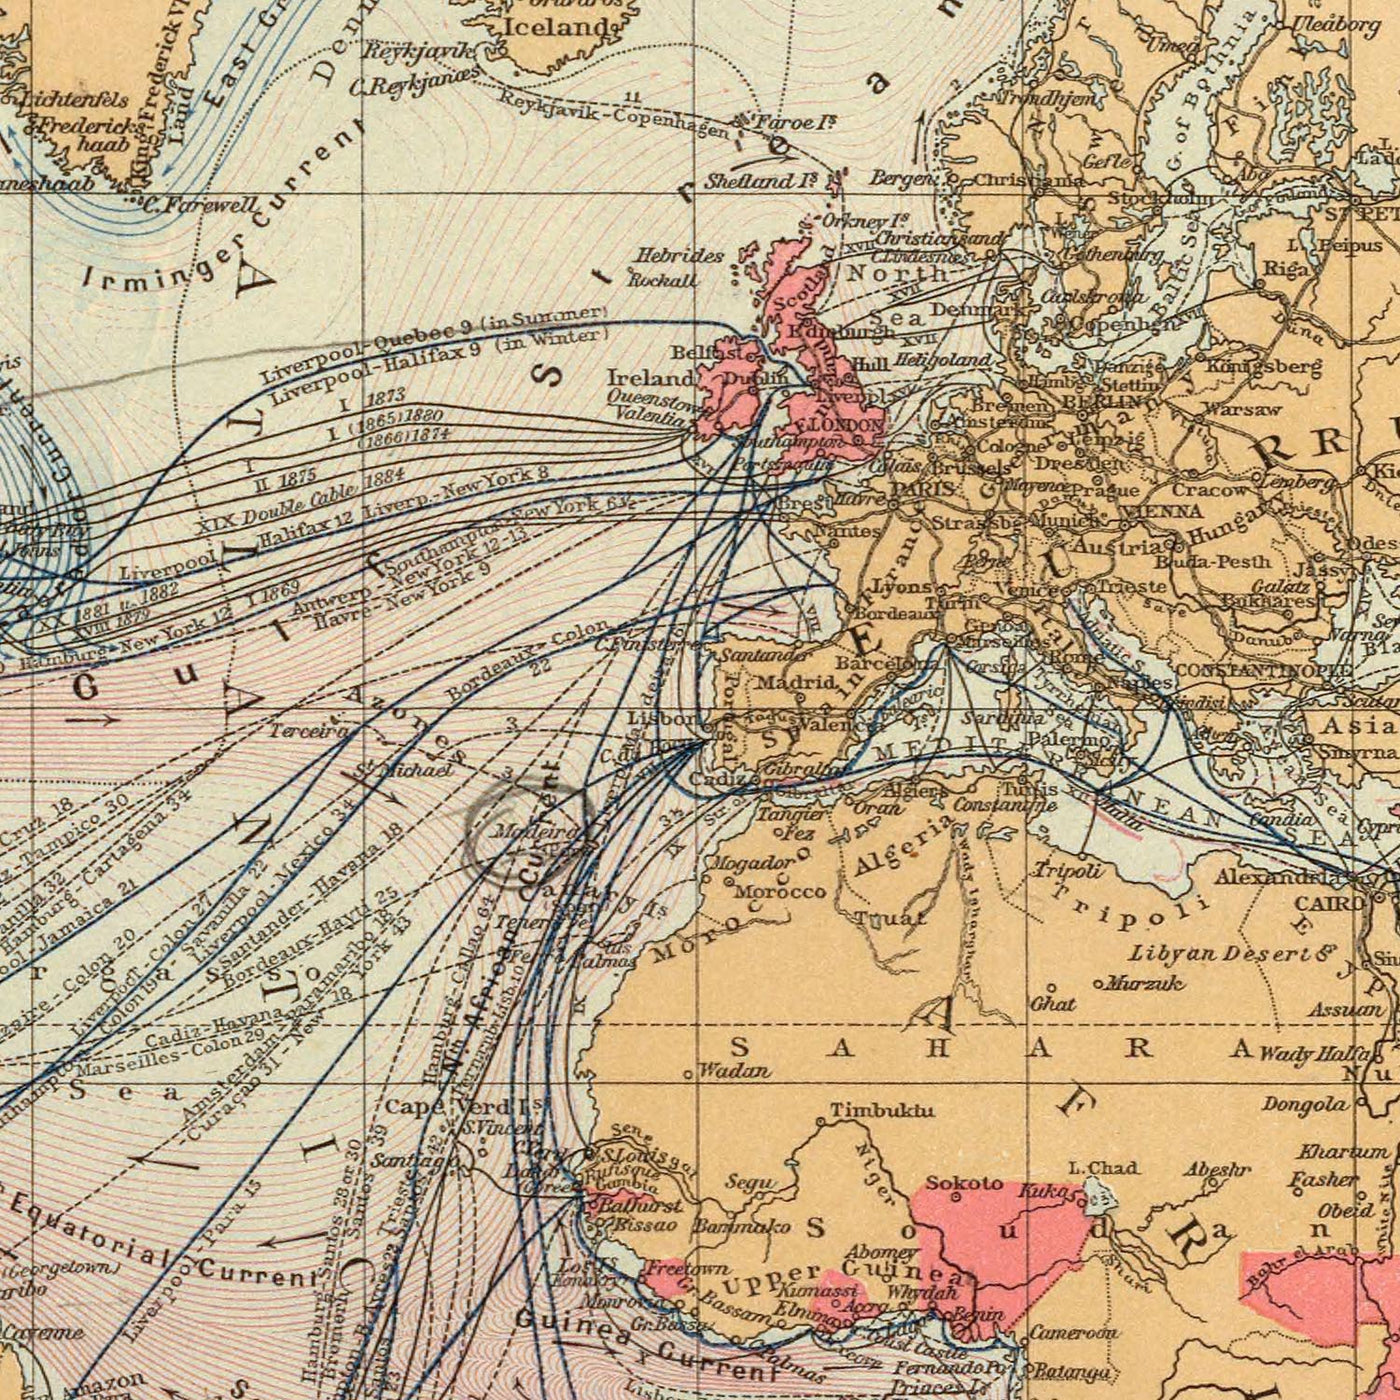 Old World Map of British Empire Trade Routes & Ocean Currents, 1895 - Shipping Chart, Submarine Cables